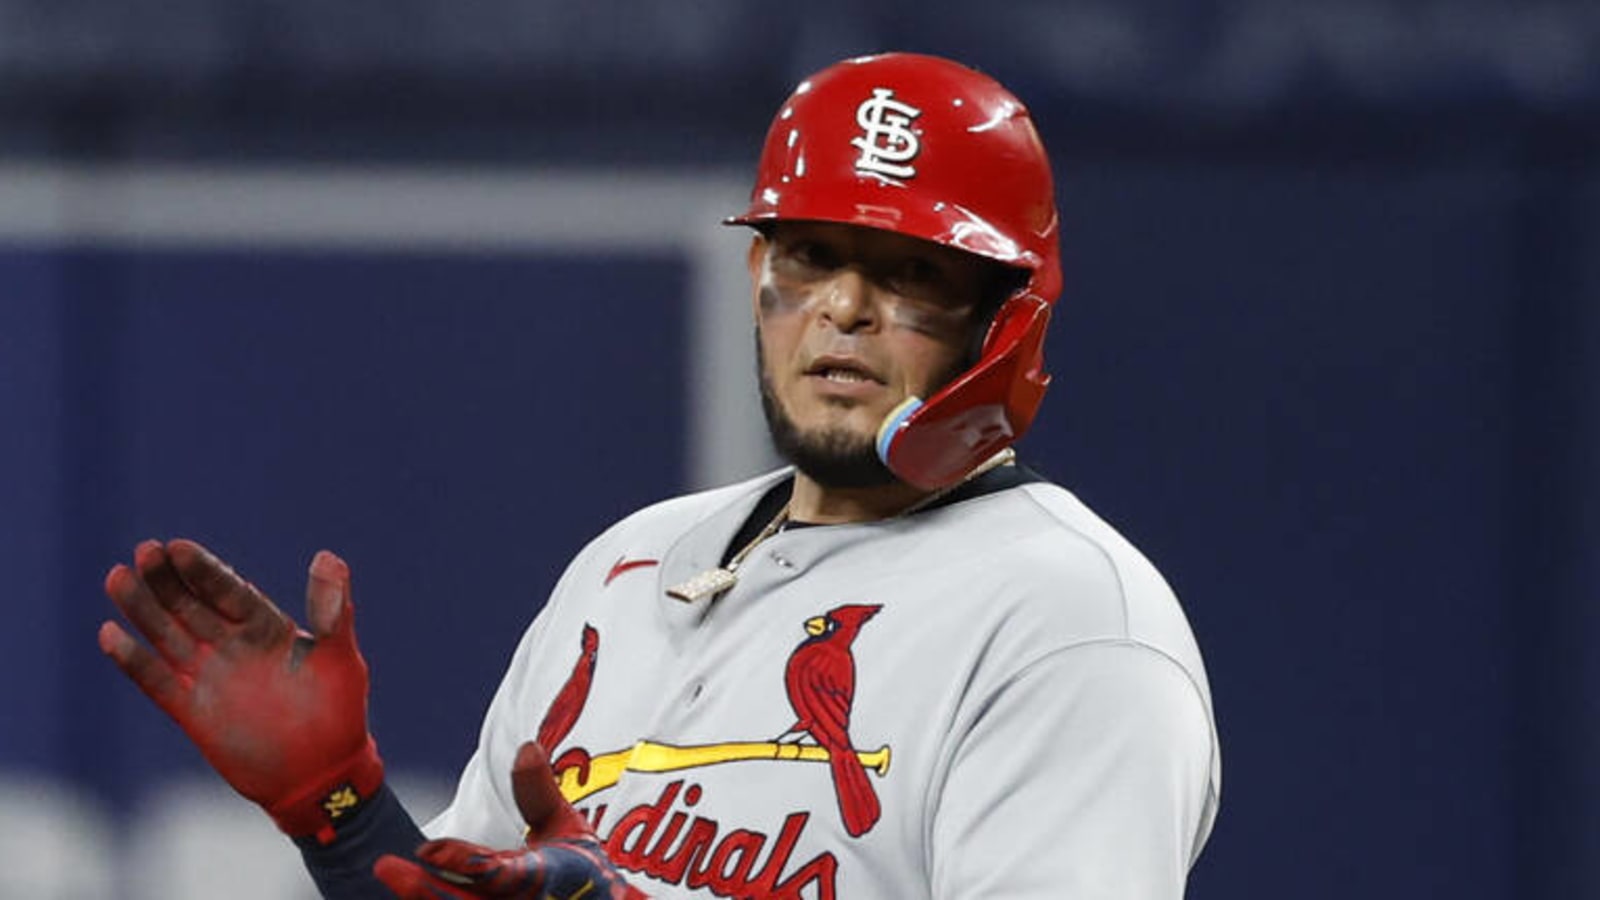 St. Louis Cardinals Catcher Yadier Molina Returns After Missing Weekend For  'Business Reasons' in Puerto Rico - Fastball